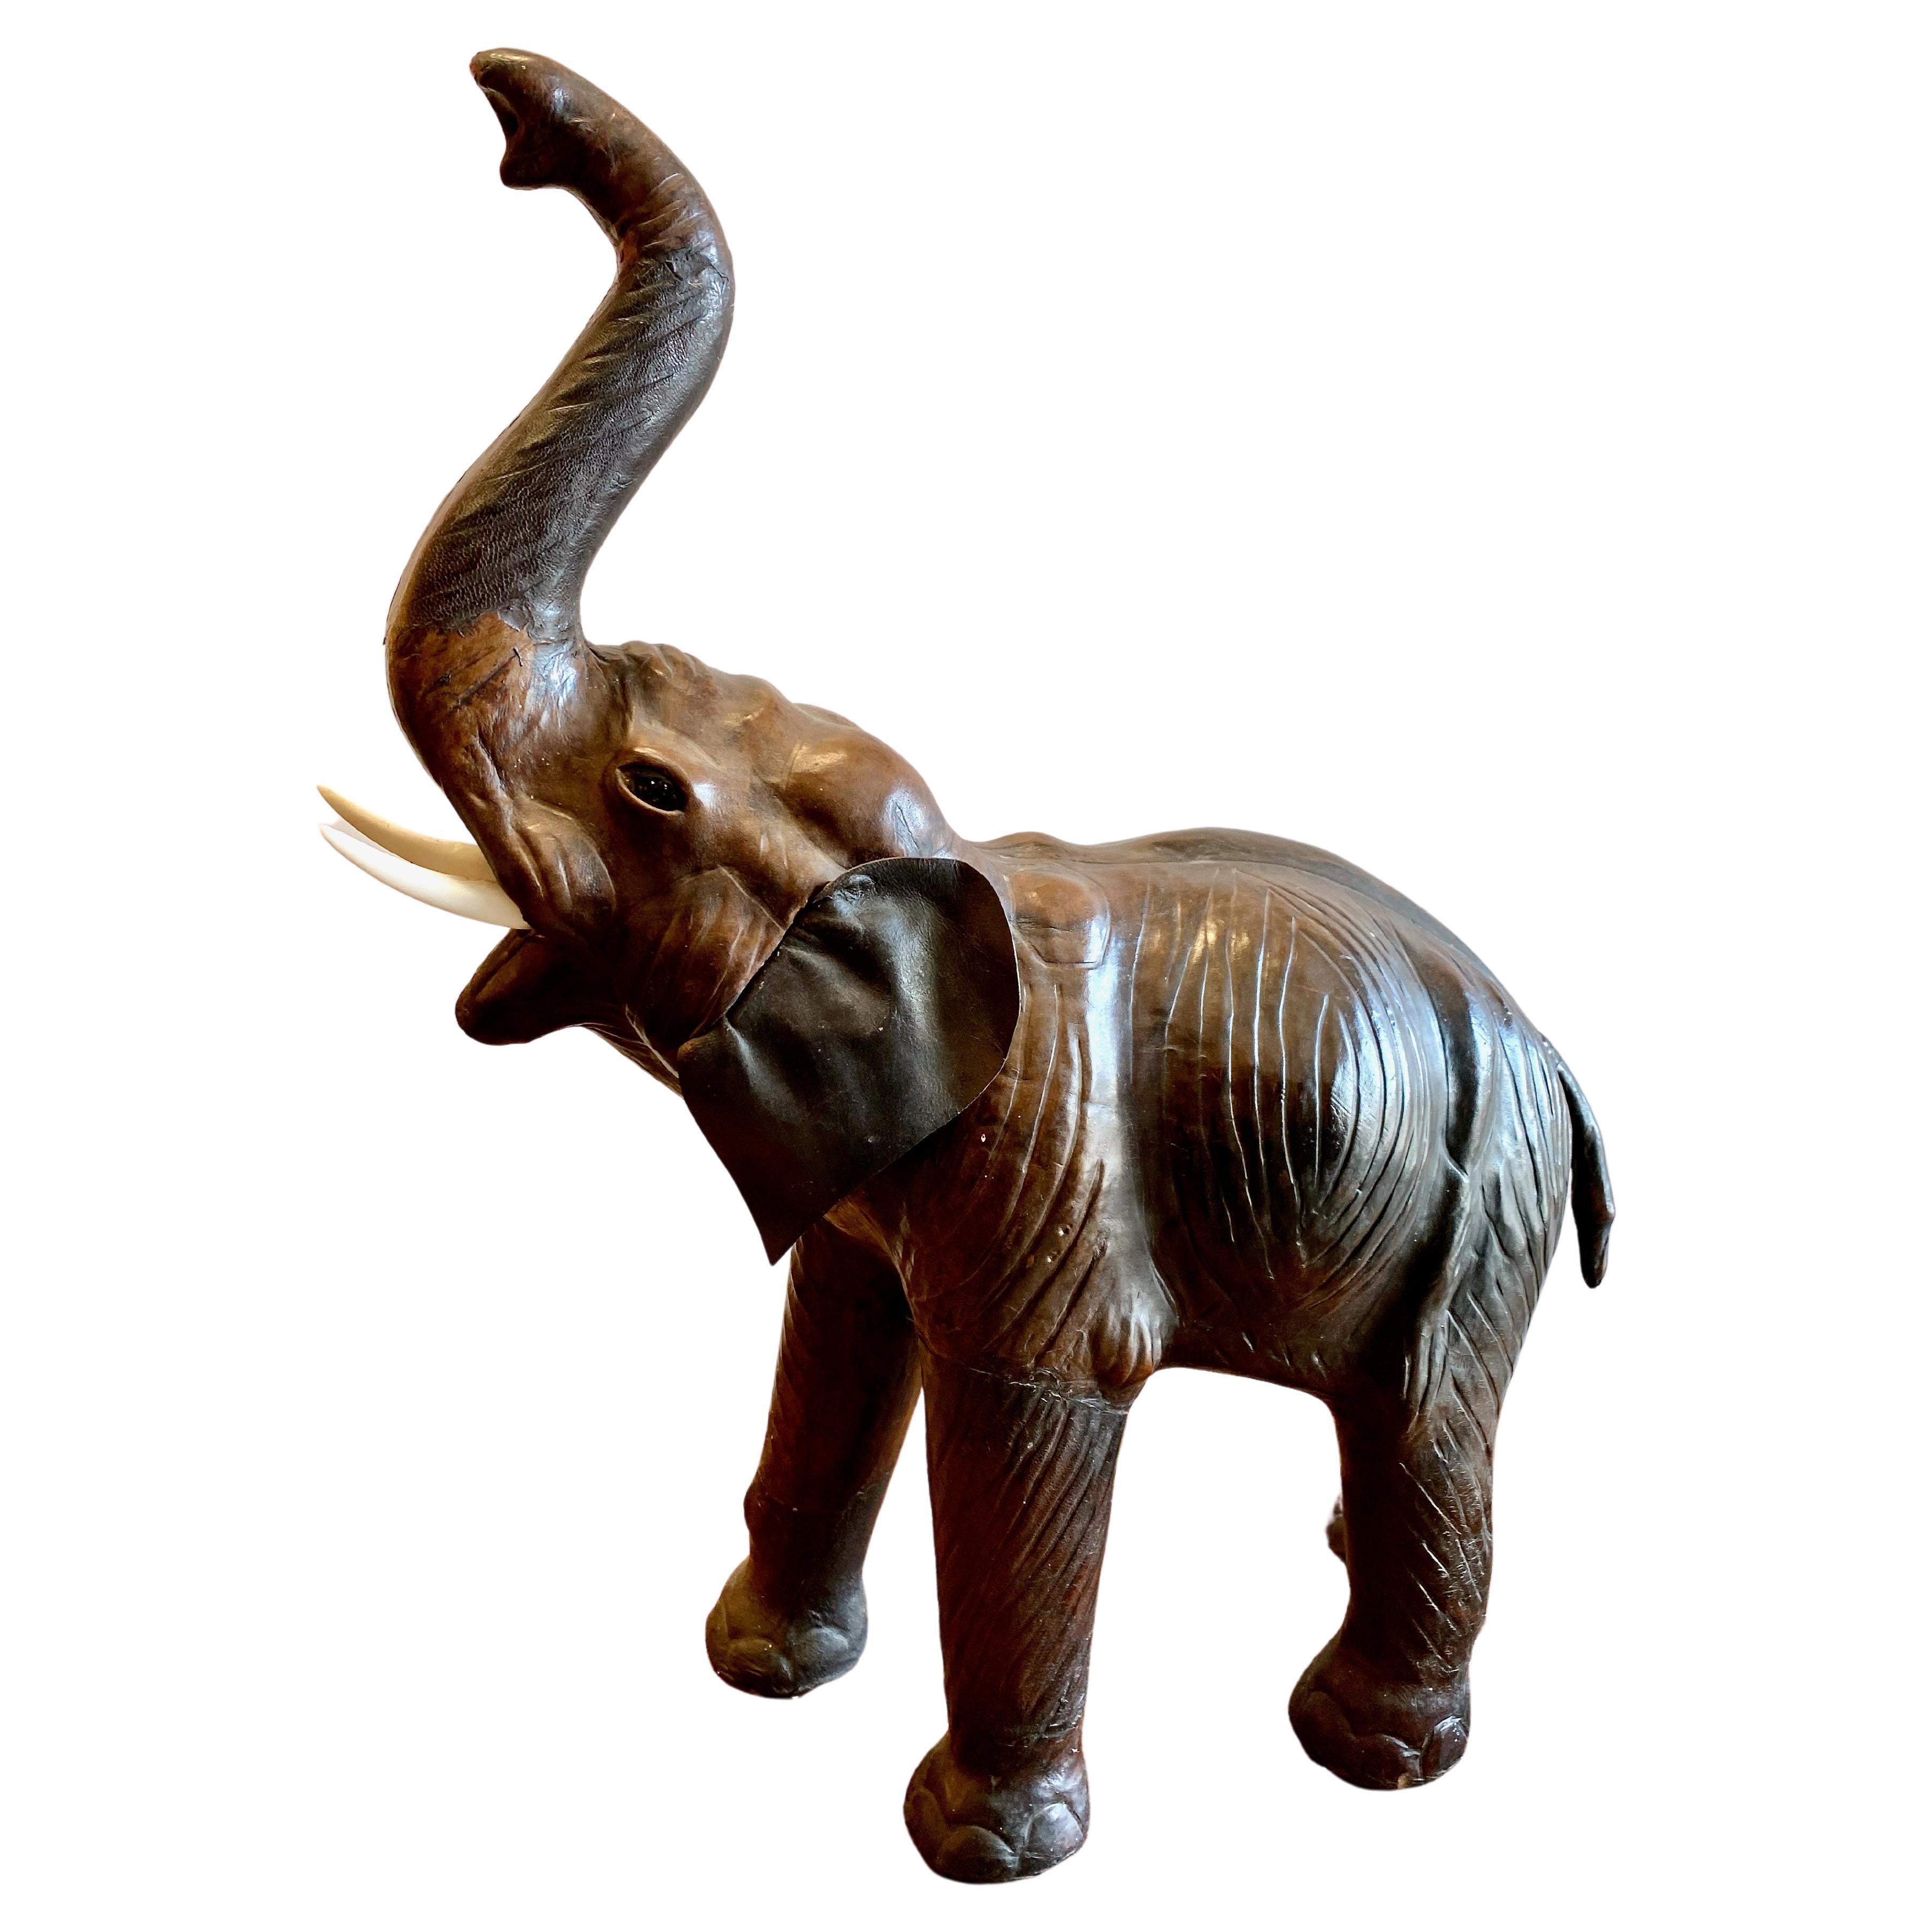 This a great example of a mid-20th century, circa 1950s, Elephant sculpture. The elephant has been eloquently detailed with all of his wondrous wrinkles and glass eyes. The leather ears are a bit stiff, but remain in good condition. The original